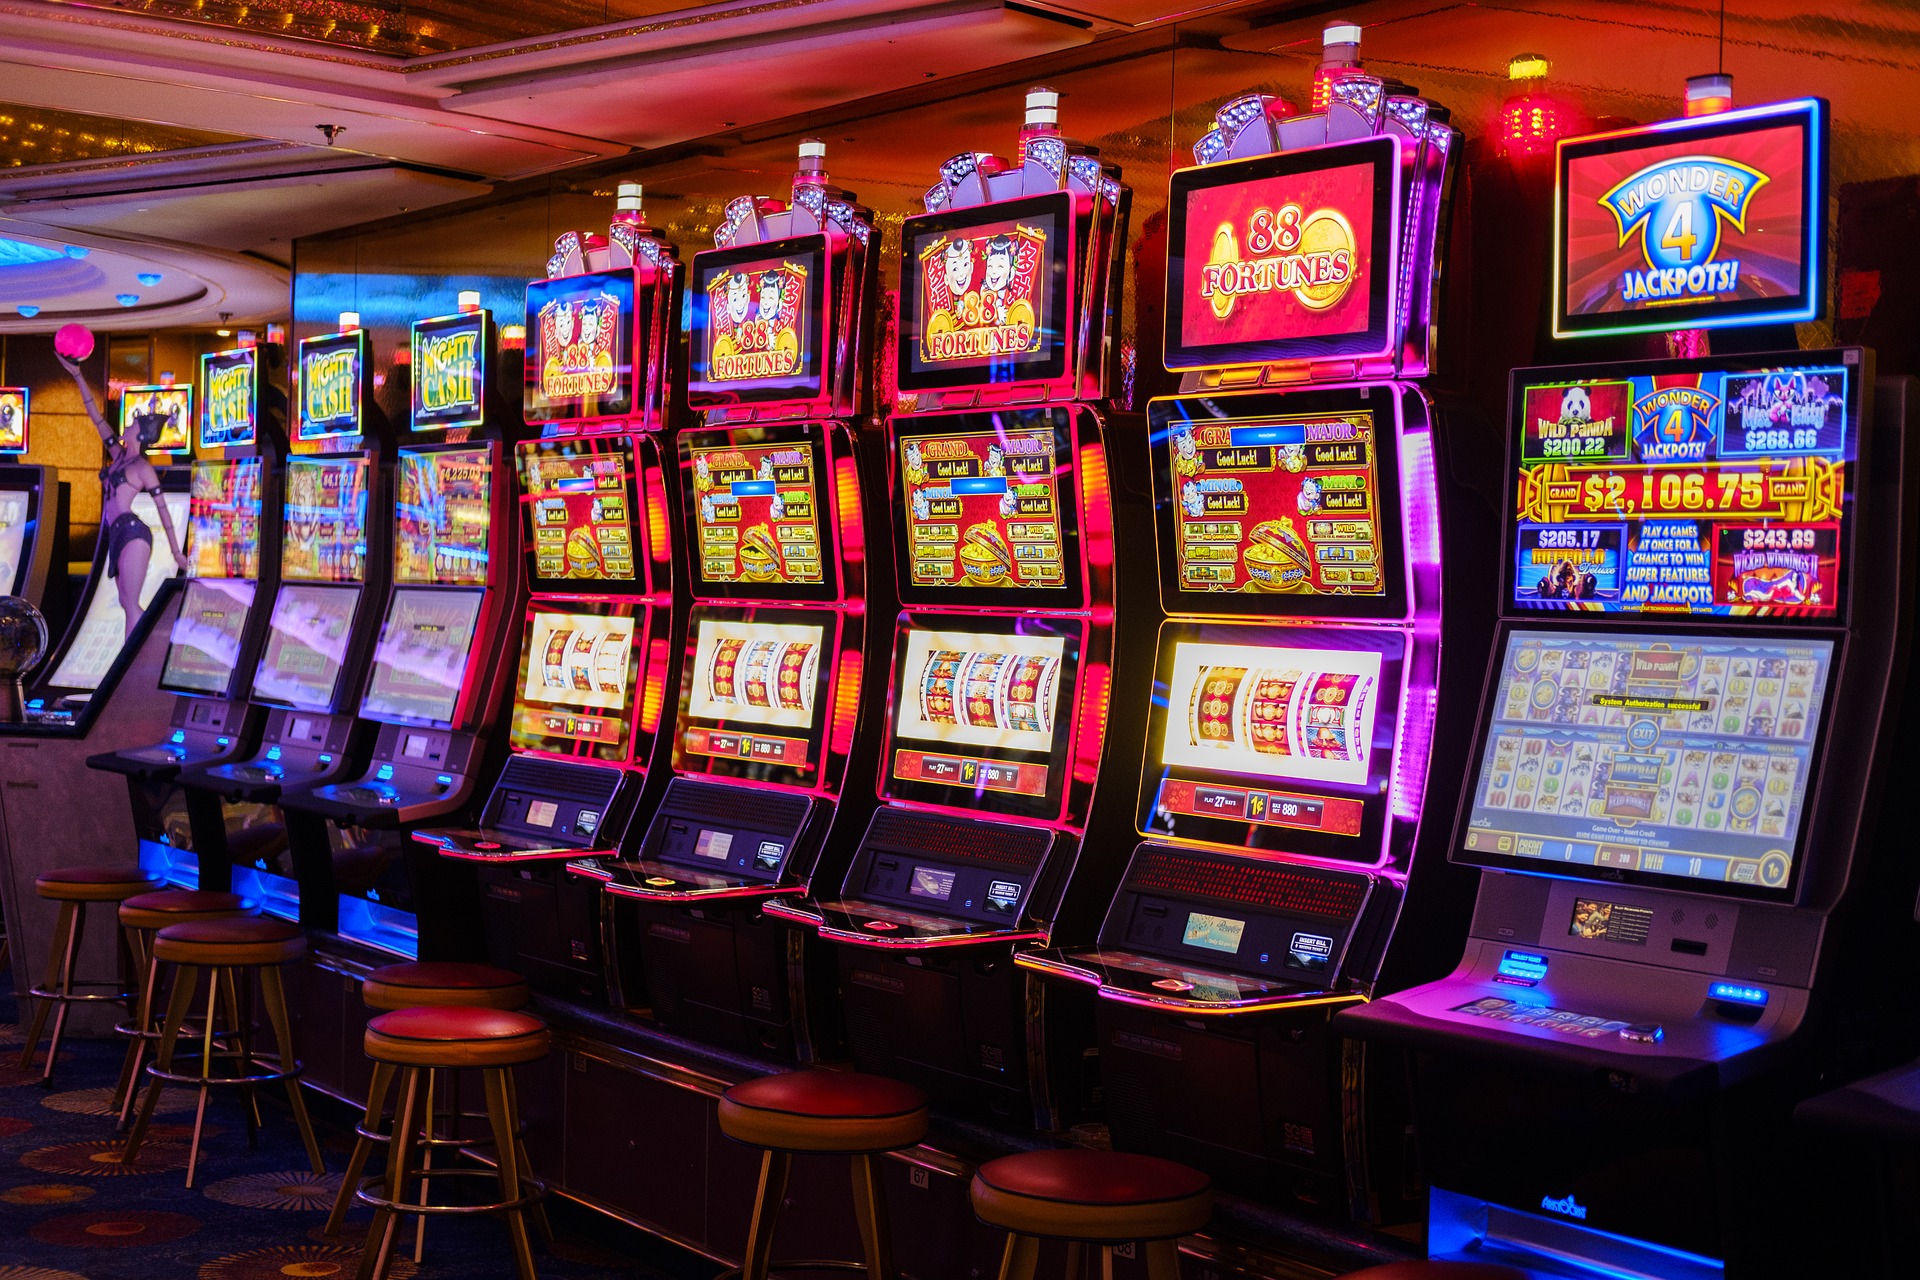 Physical world and online casinos compared